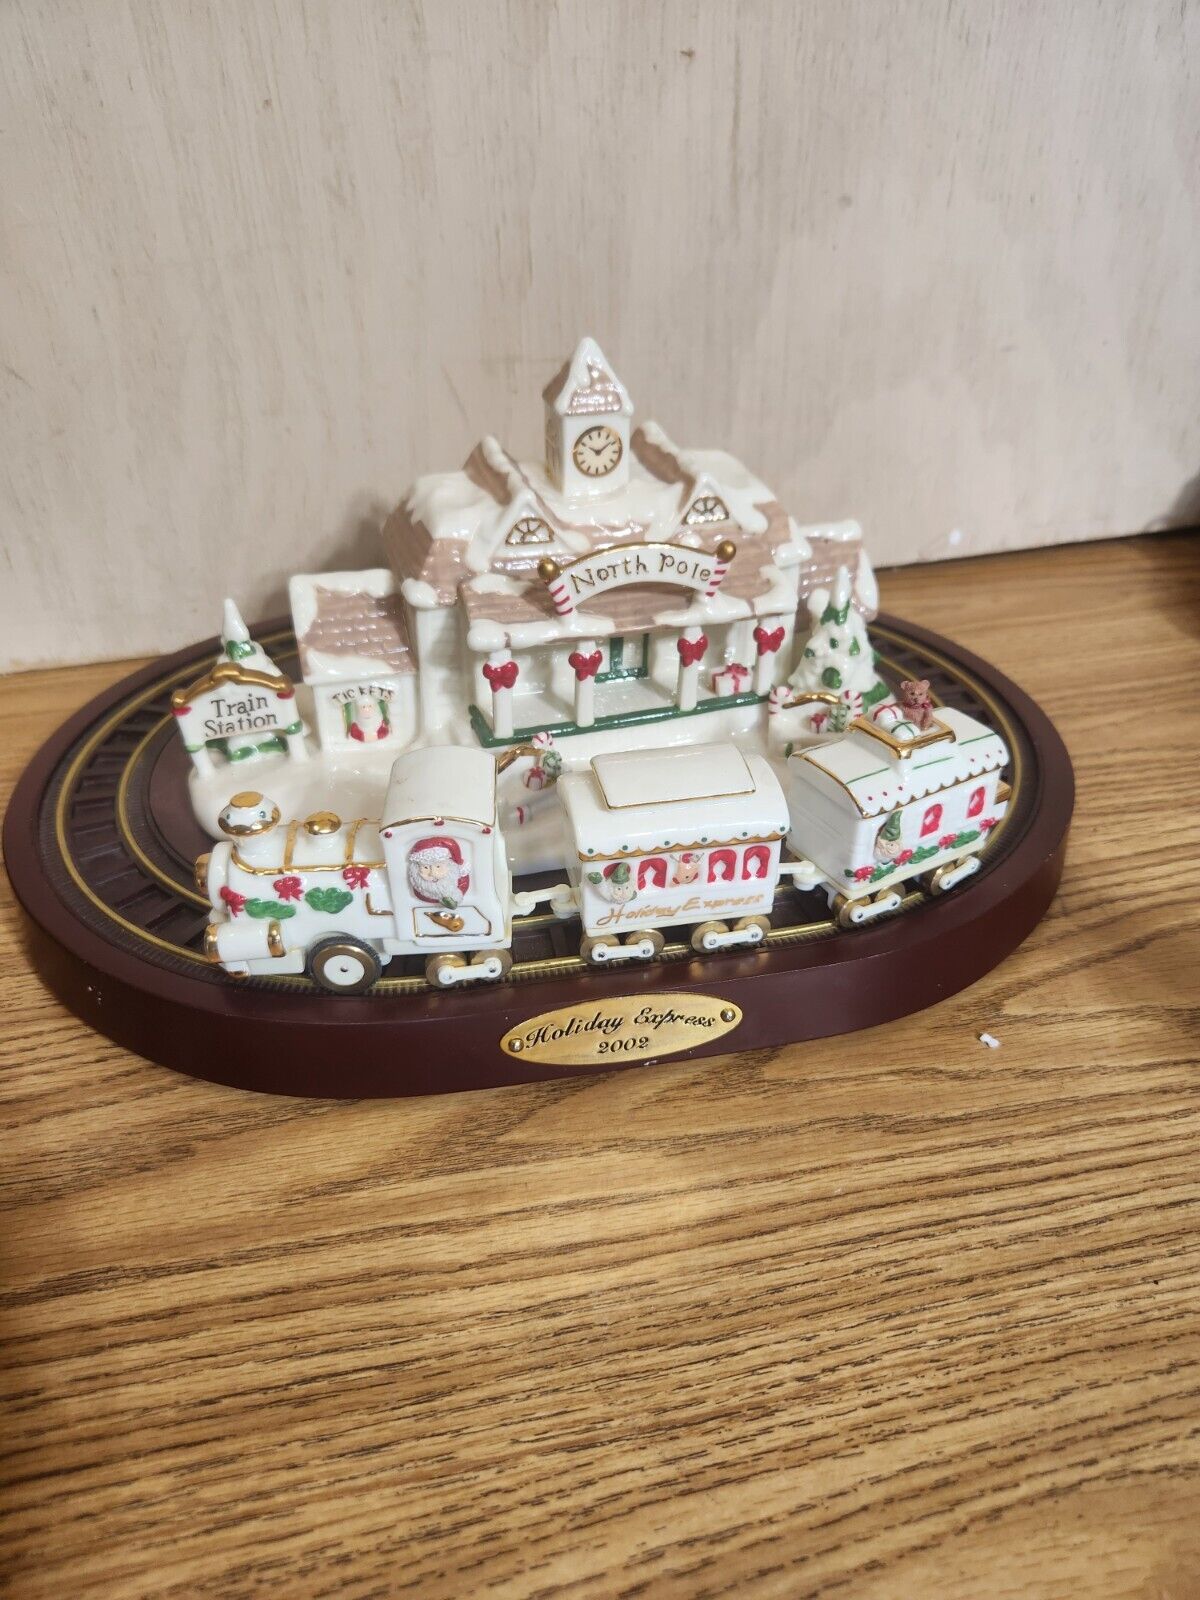 Avon Holiday Express Porcelain Train 2002 Christmas Gift Collection IT WORKS